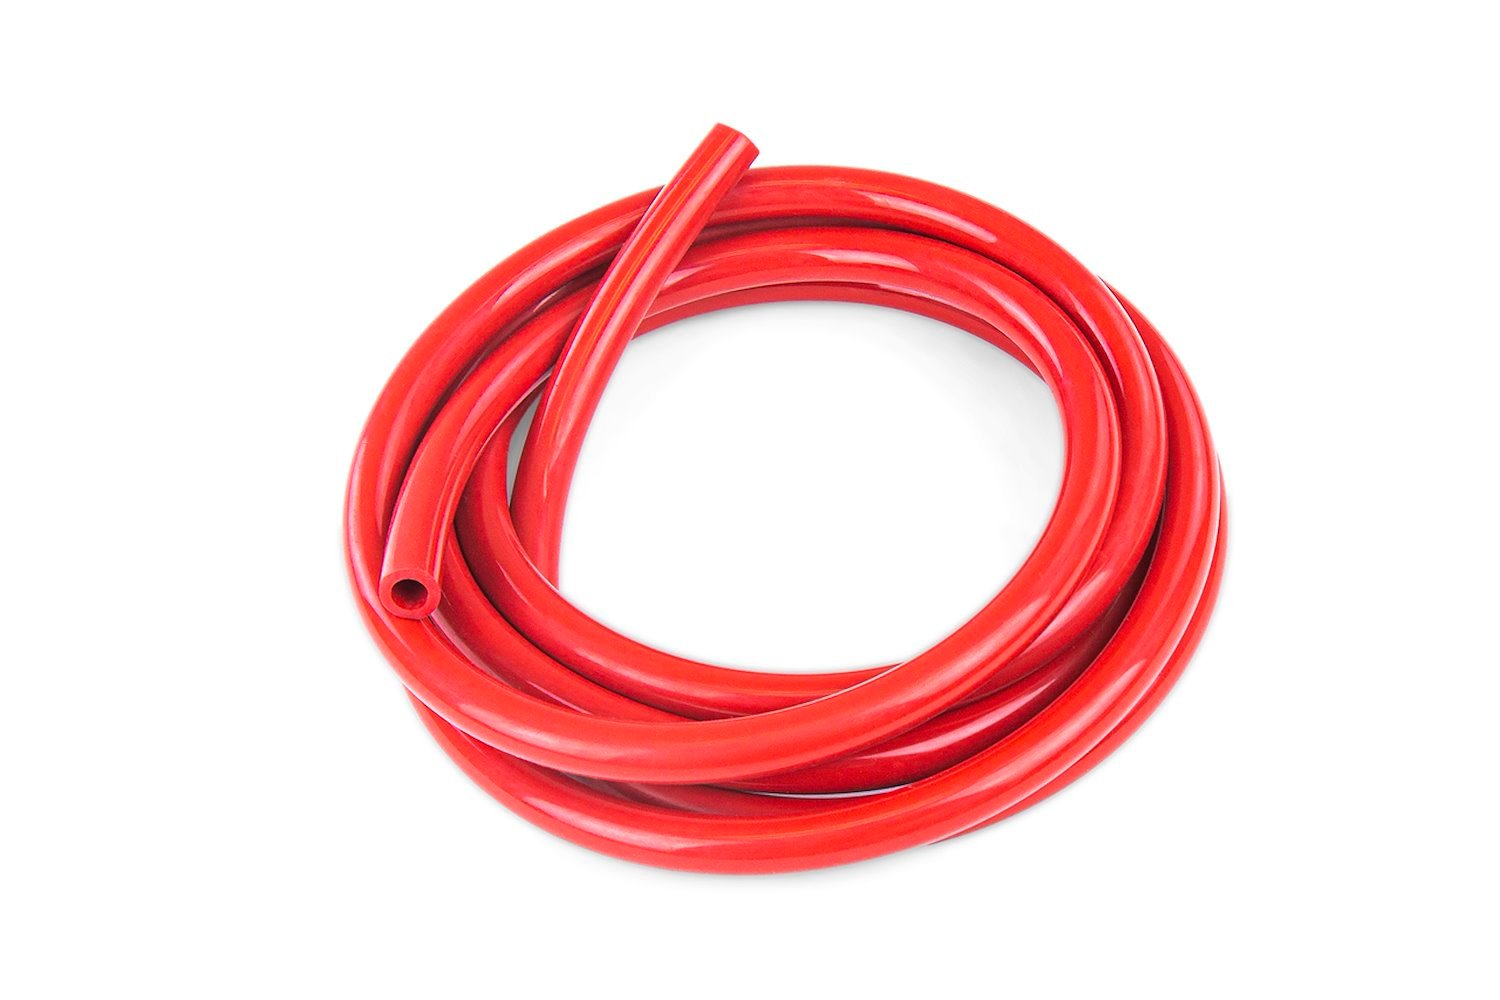 HTSVH3-REDx5 High-Temperature Silicone Vacuum Hose Tubing, 1/8 in. ID, 5 ft. Roll, Red